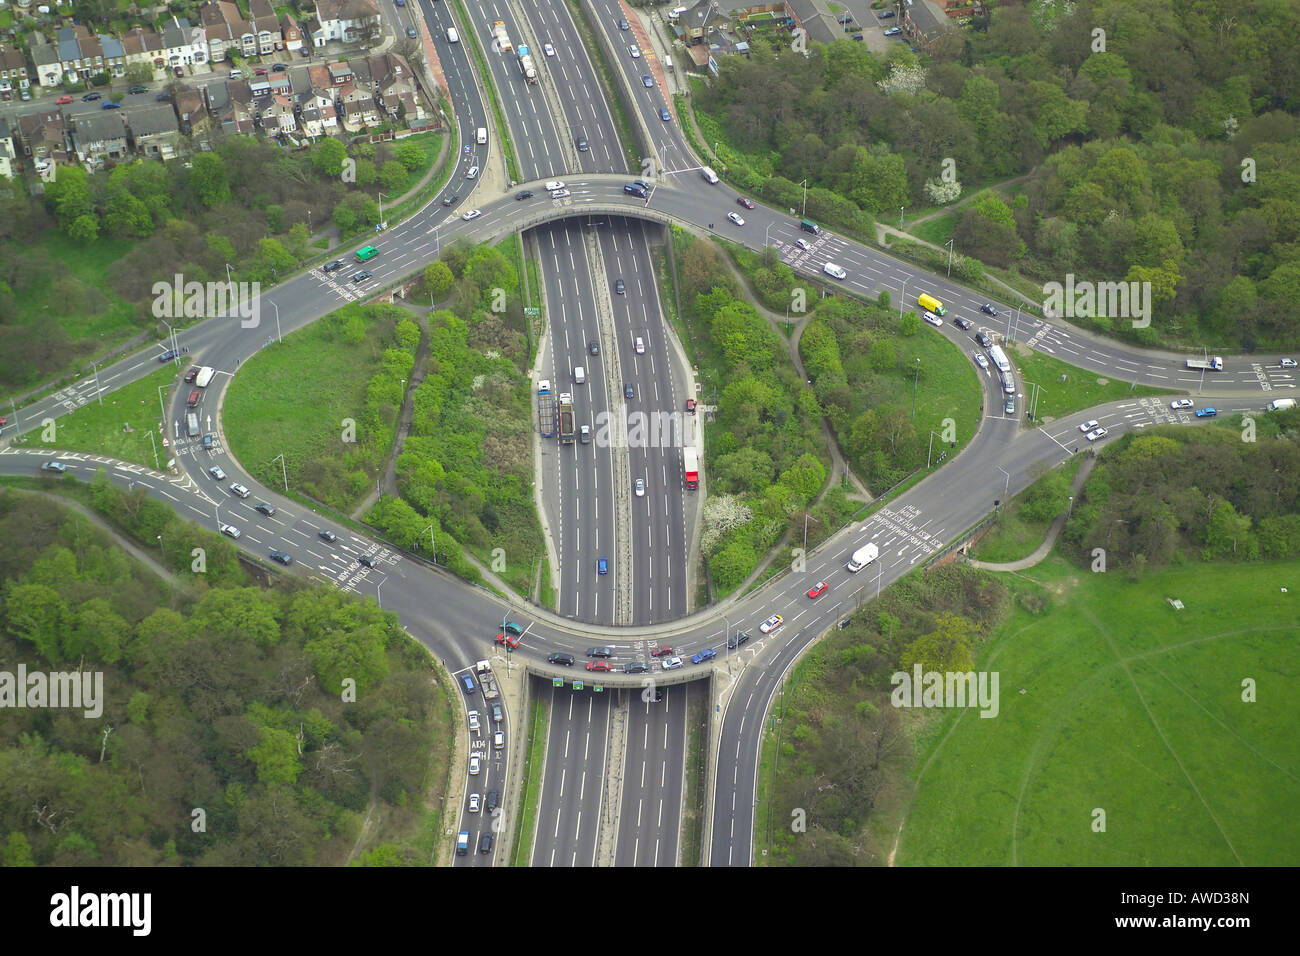 Aerial view on the road junction of the North Circular Road near South Woodford in North London Stock Photo